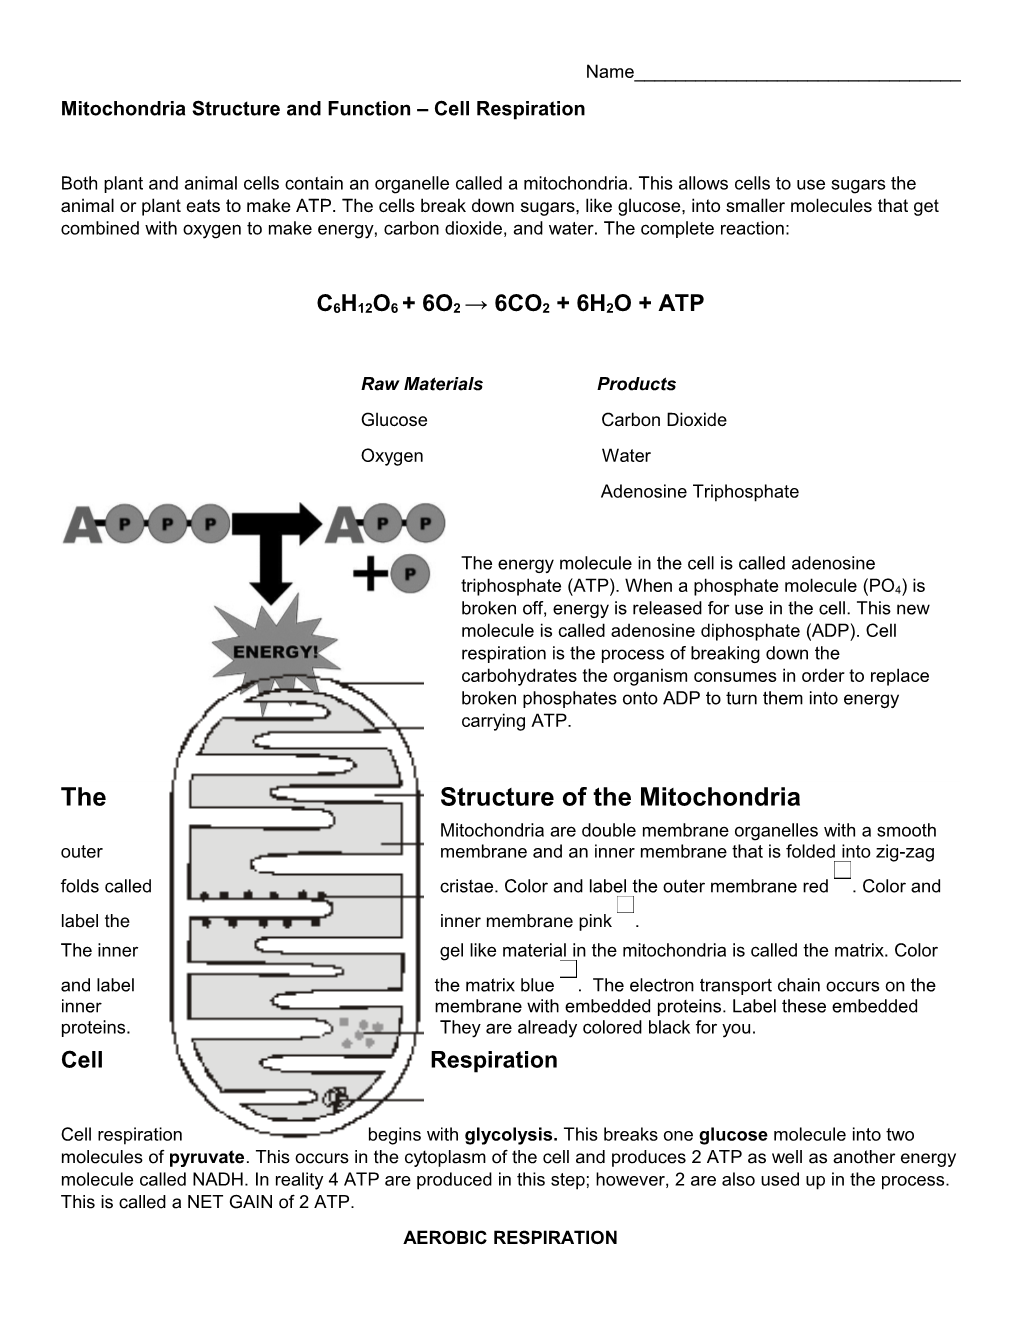 Mitochondria Structure and Function Cell Respiration